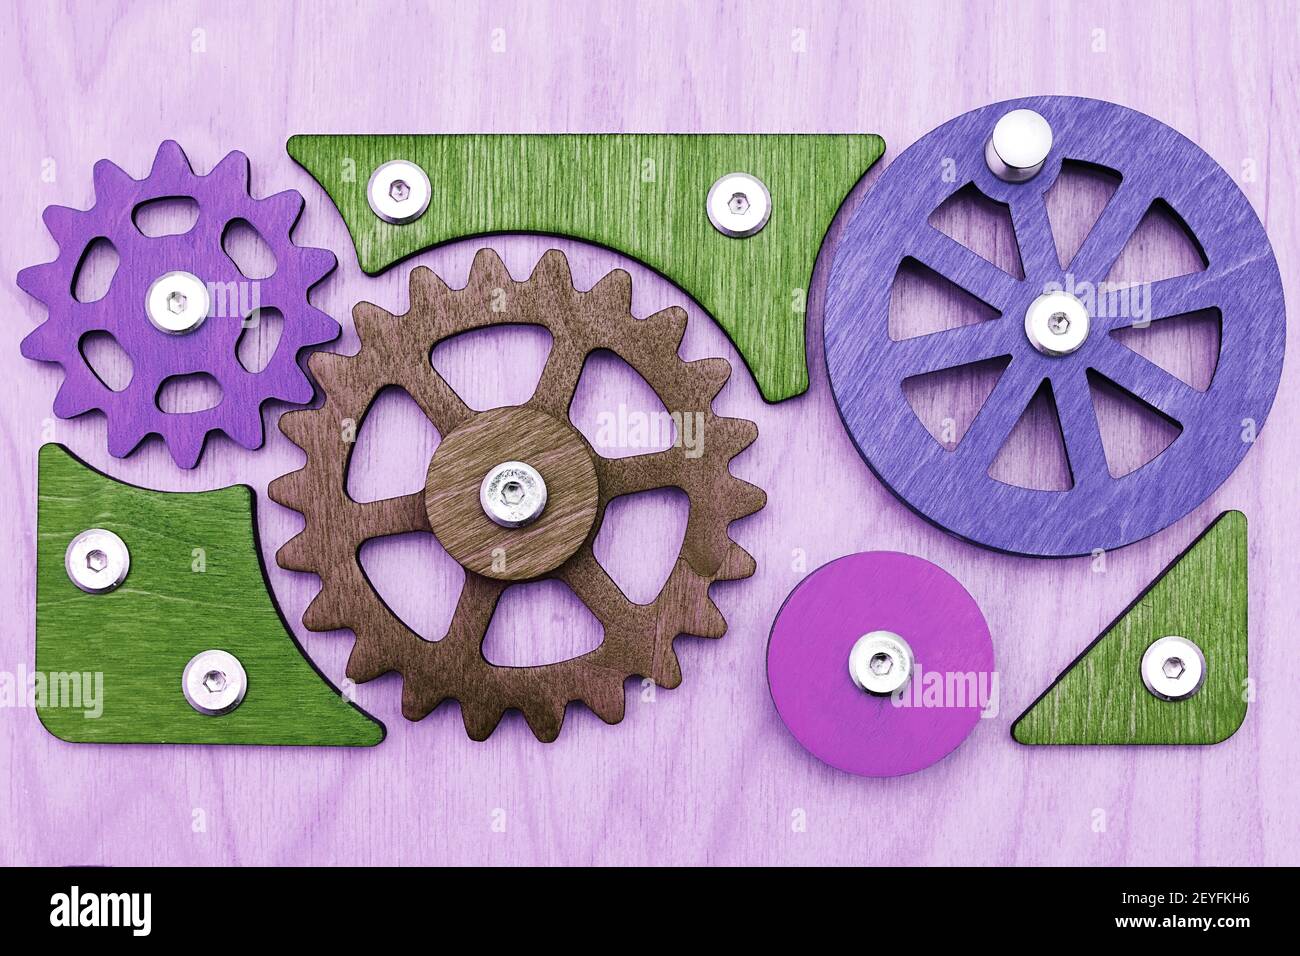 Eco friendly kids wooden busy board with gears and wheels. Kids toys and backgrounds Stock Photo